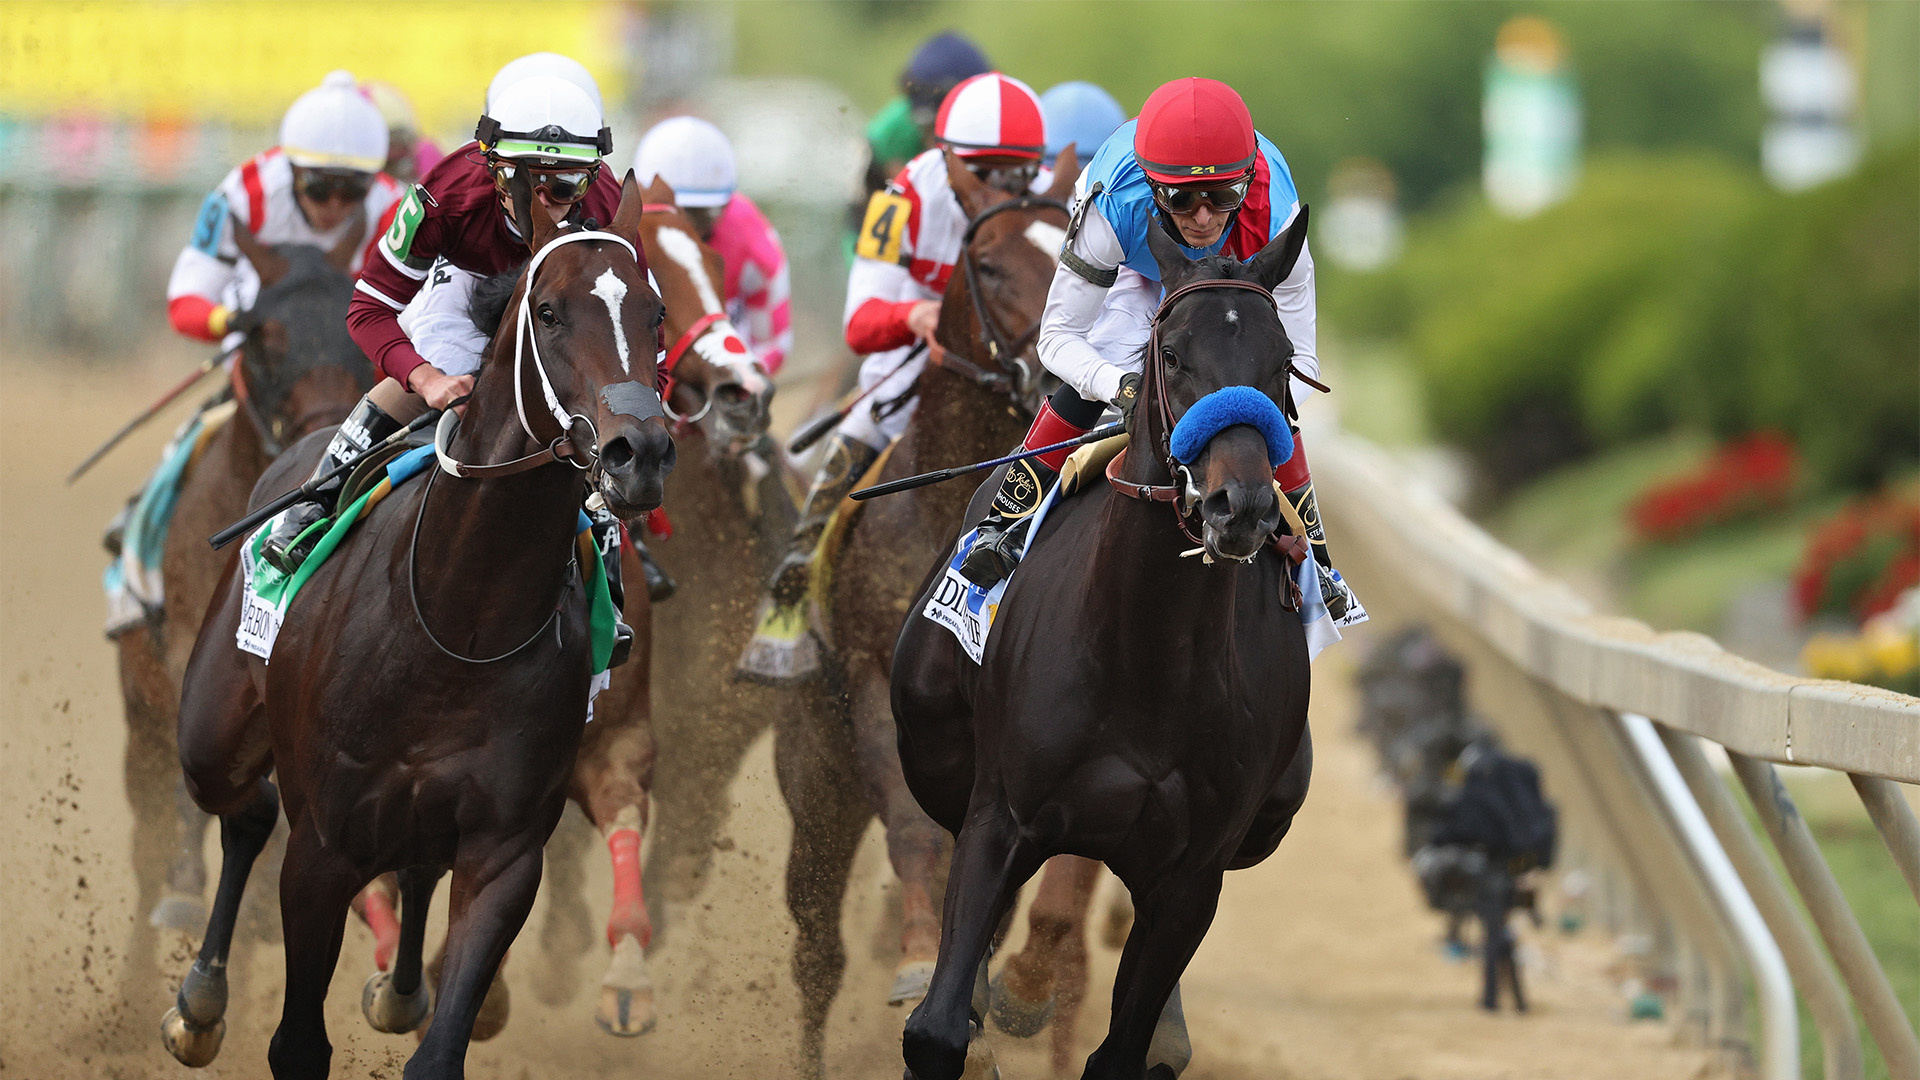 Horse Racing, Watching the Preakness Stakes, Live stream excitement, TV coverage, 1920x1080 Full HD Desktop